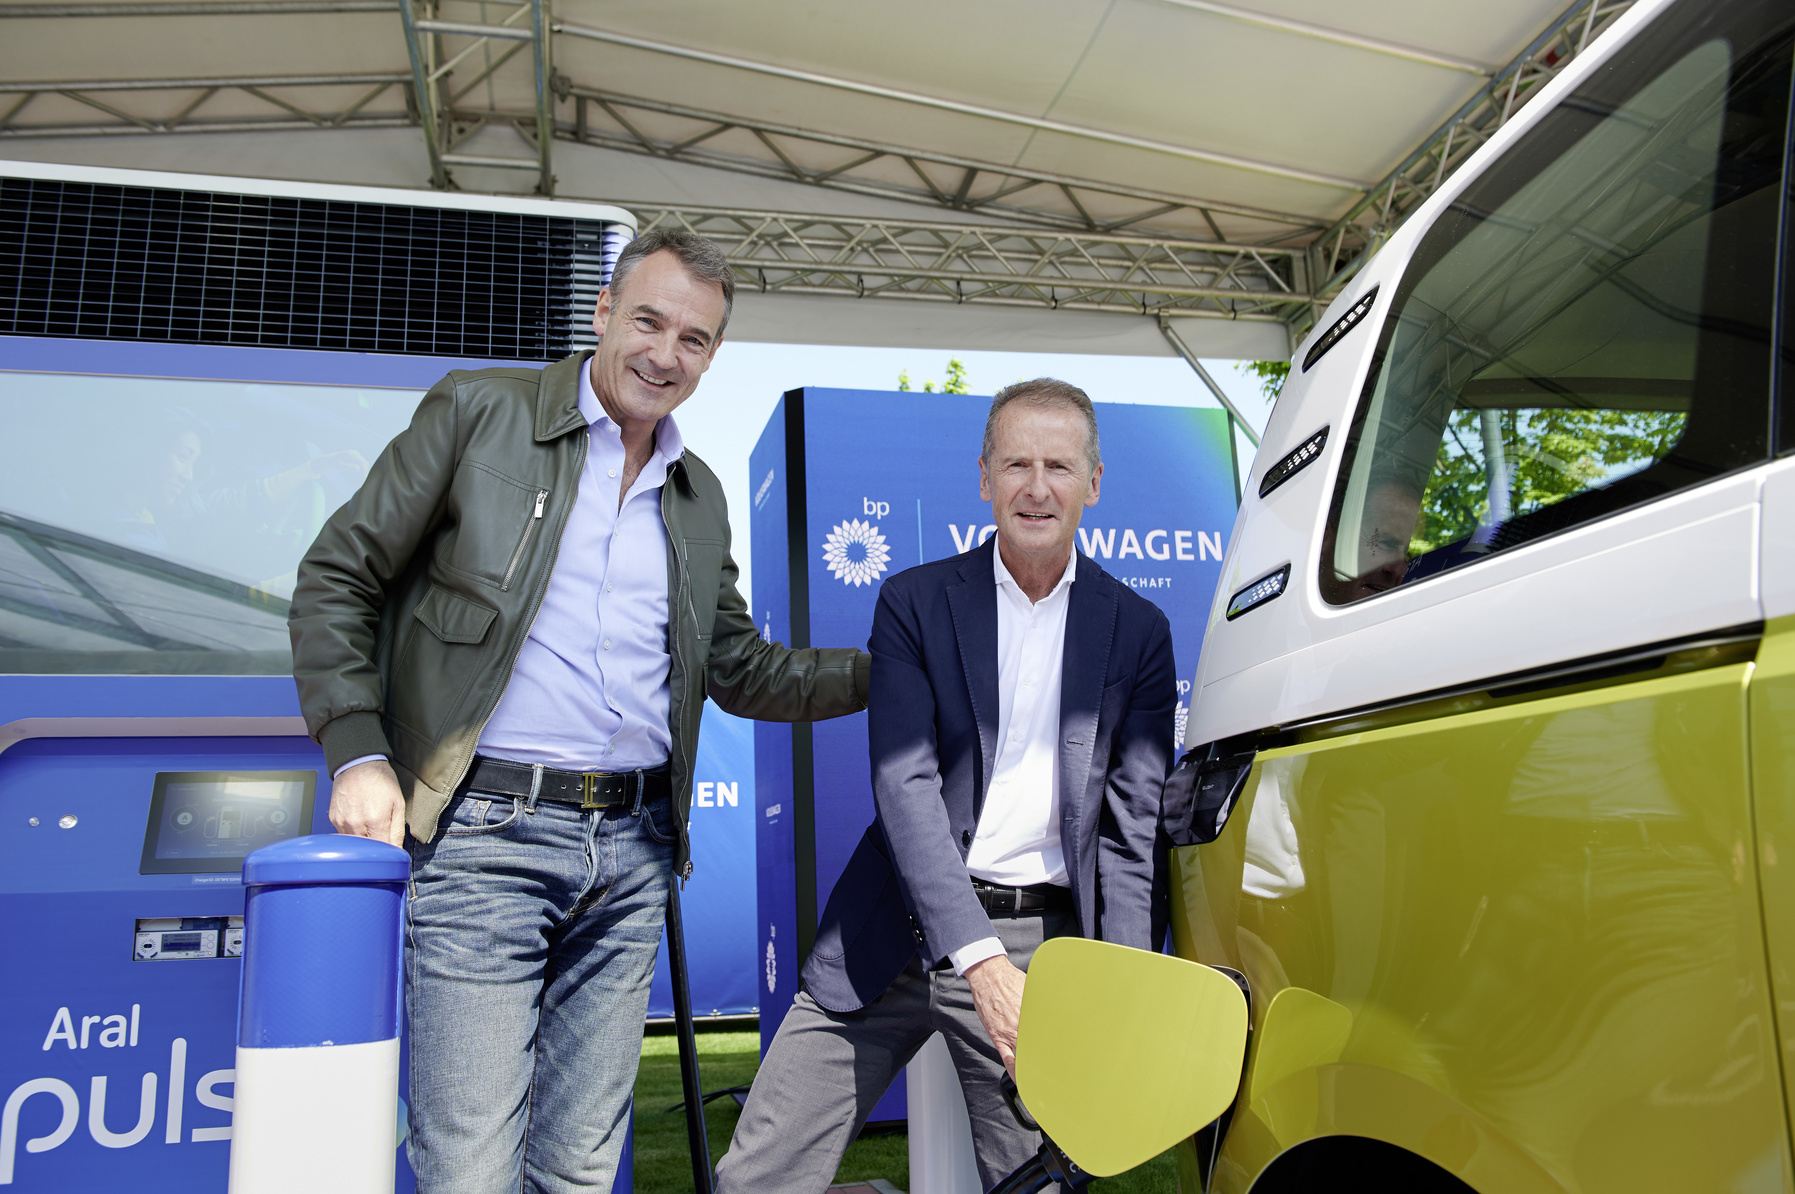 Volkswagen Group and bp launch strategic partnership to rapidly